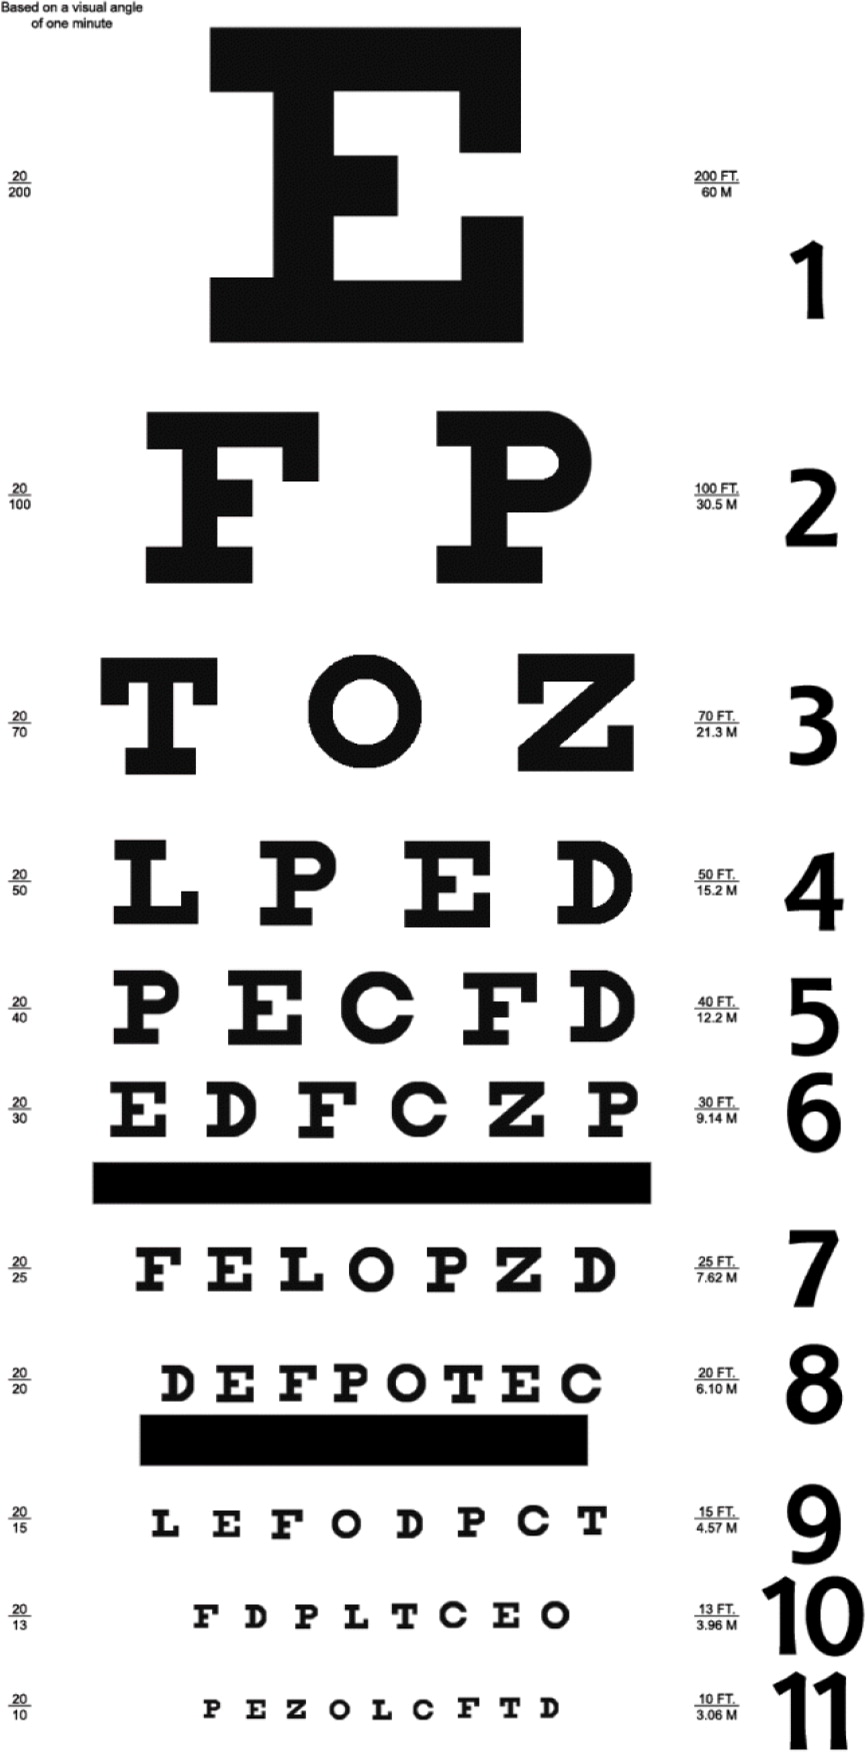 Childhood Eye Examination in Primary Care | AAFP